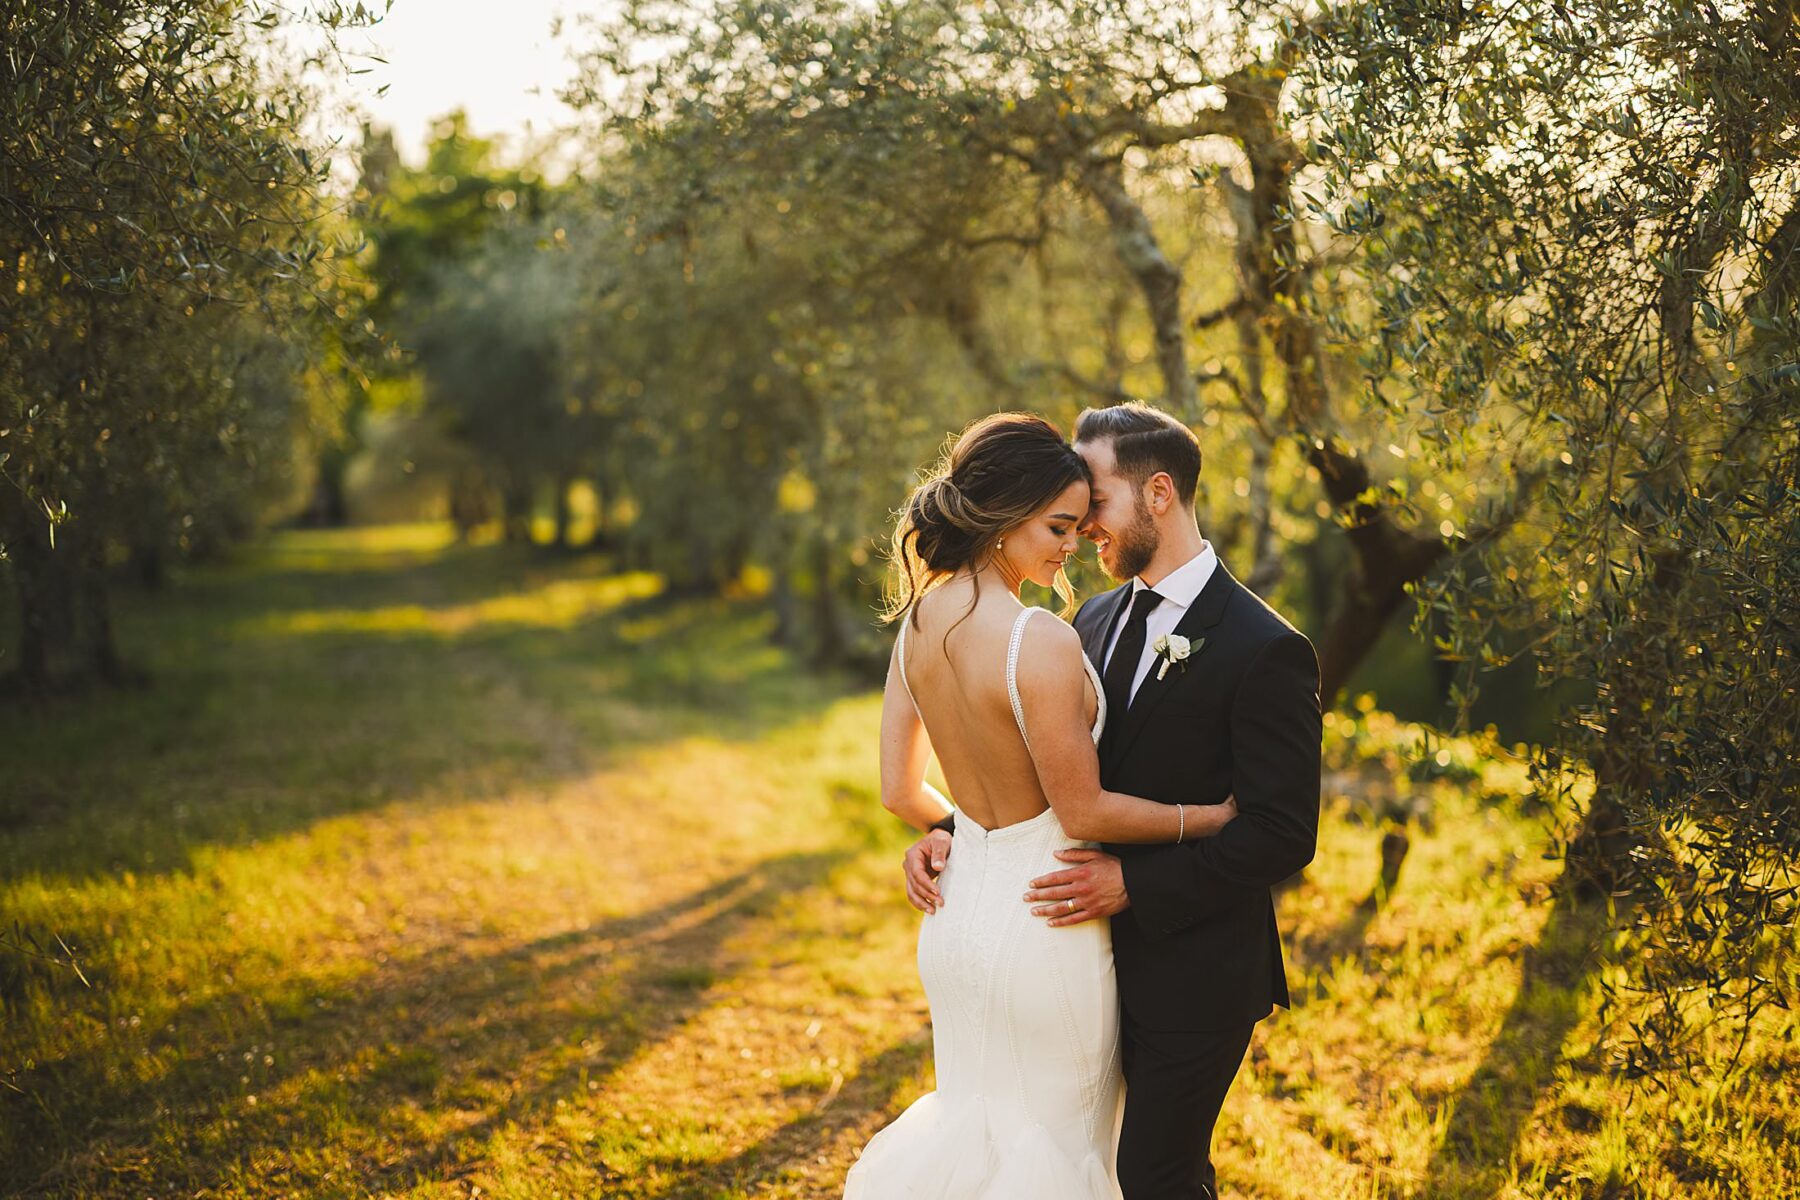 Dreaming intimate bride and groom wedding portrait in the evocative olive groves of Borgo Stomennano during golden hour